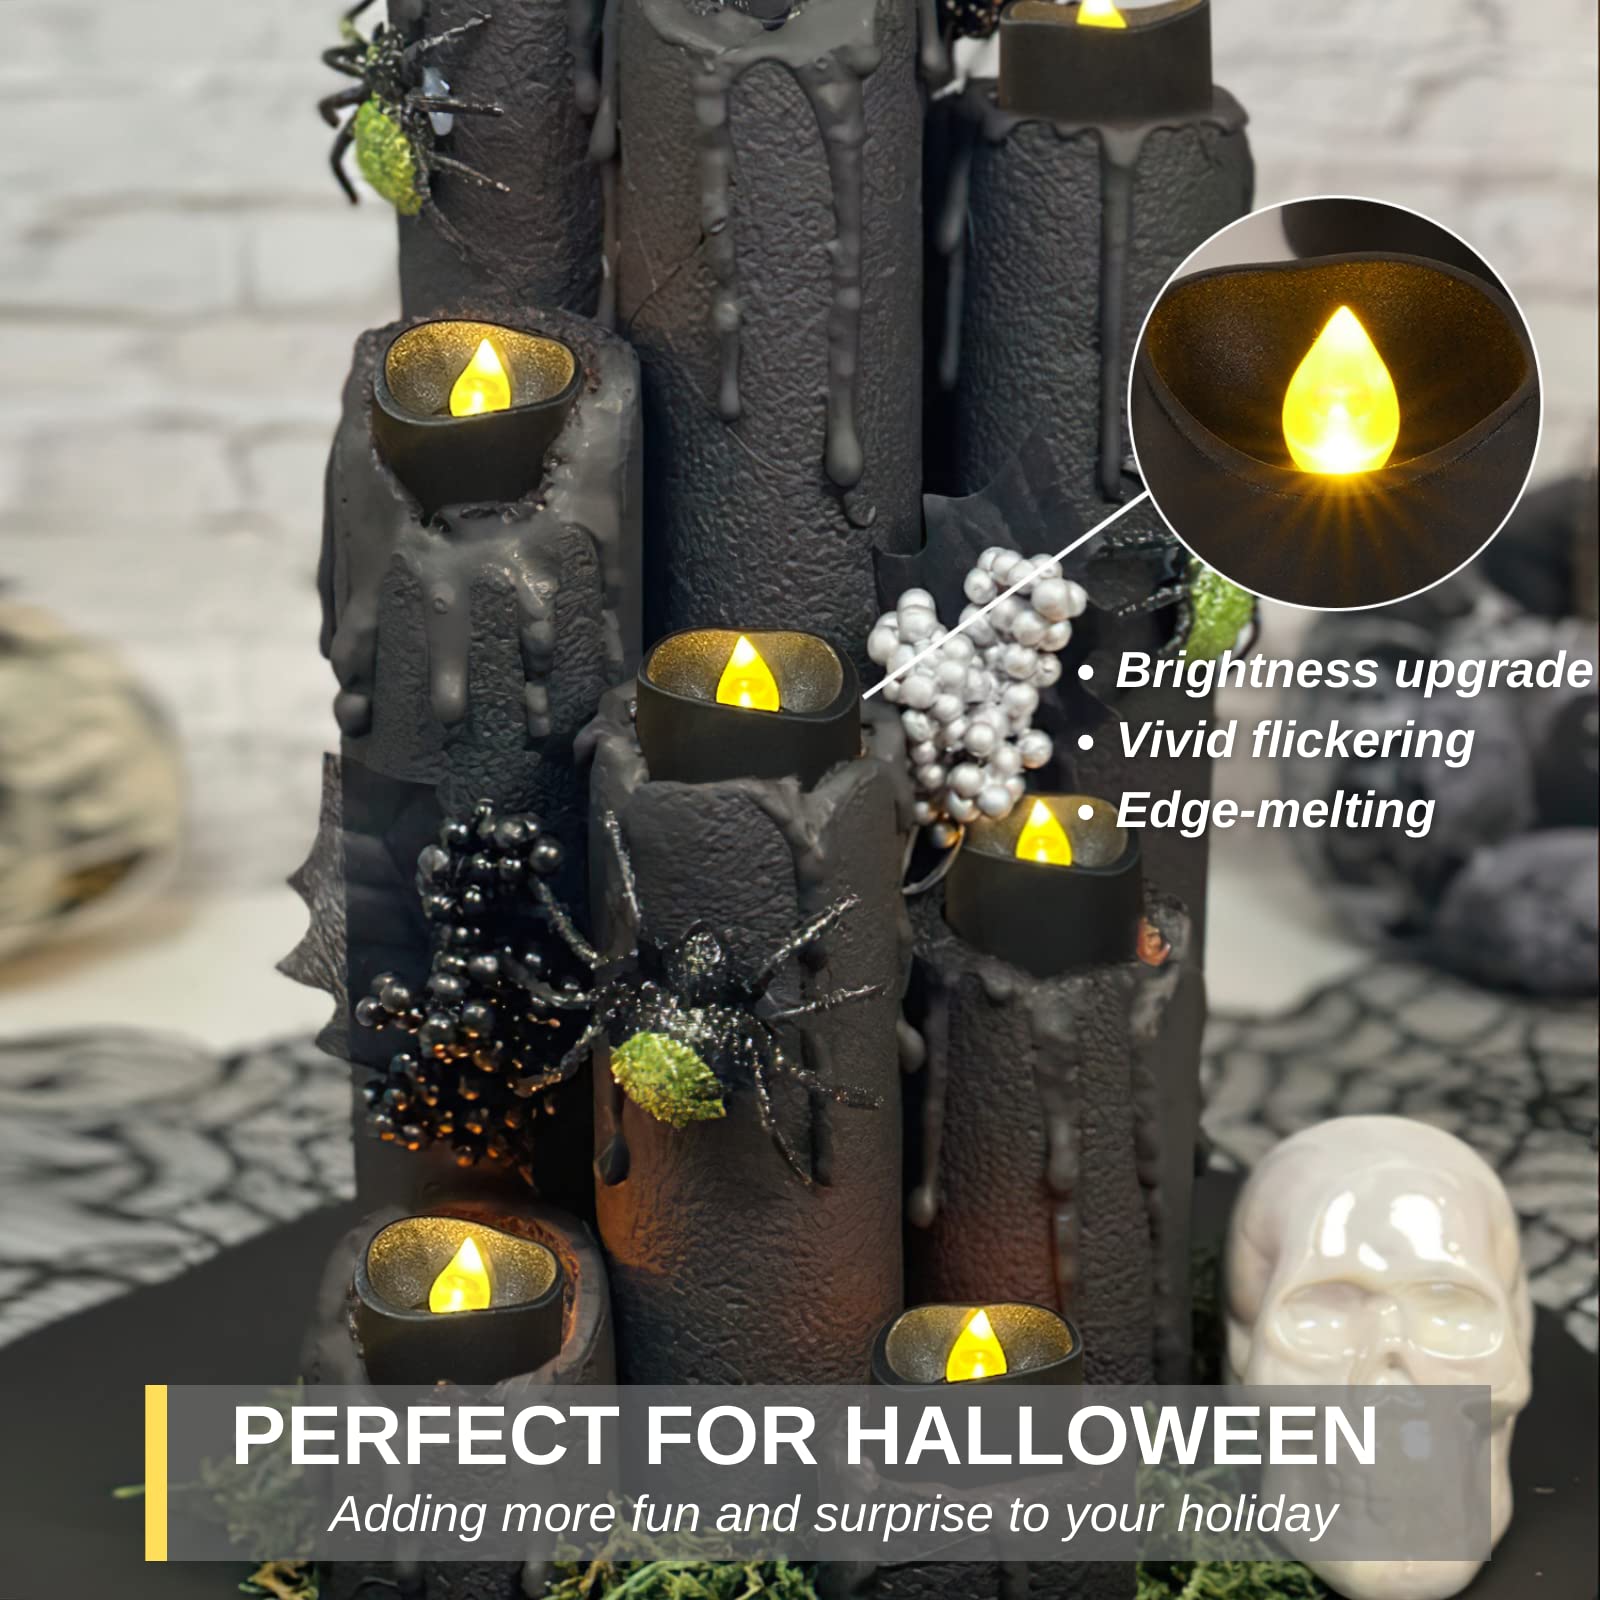 Homemory Black Tea Lights Candles Battery Operated, 12-Pack Flameless Votive Candles, 200+Hours Flickering LED Candles Colored Tealights Candles for Halloween, Holiday Decor, Theme Party, Table Decor